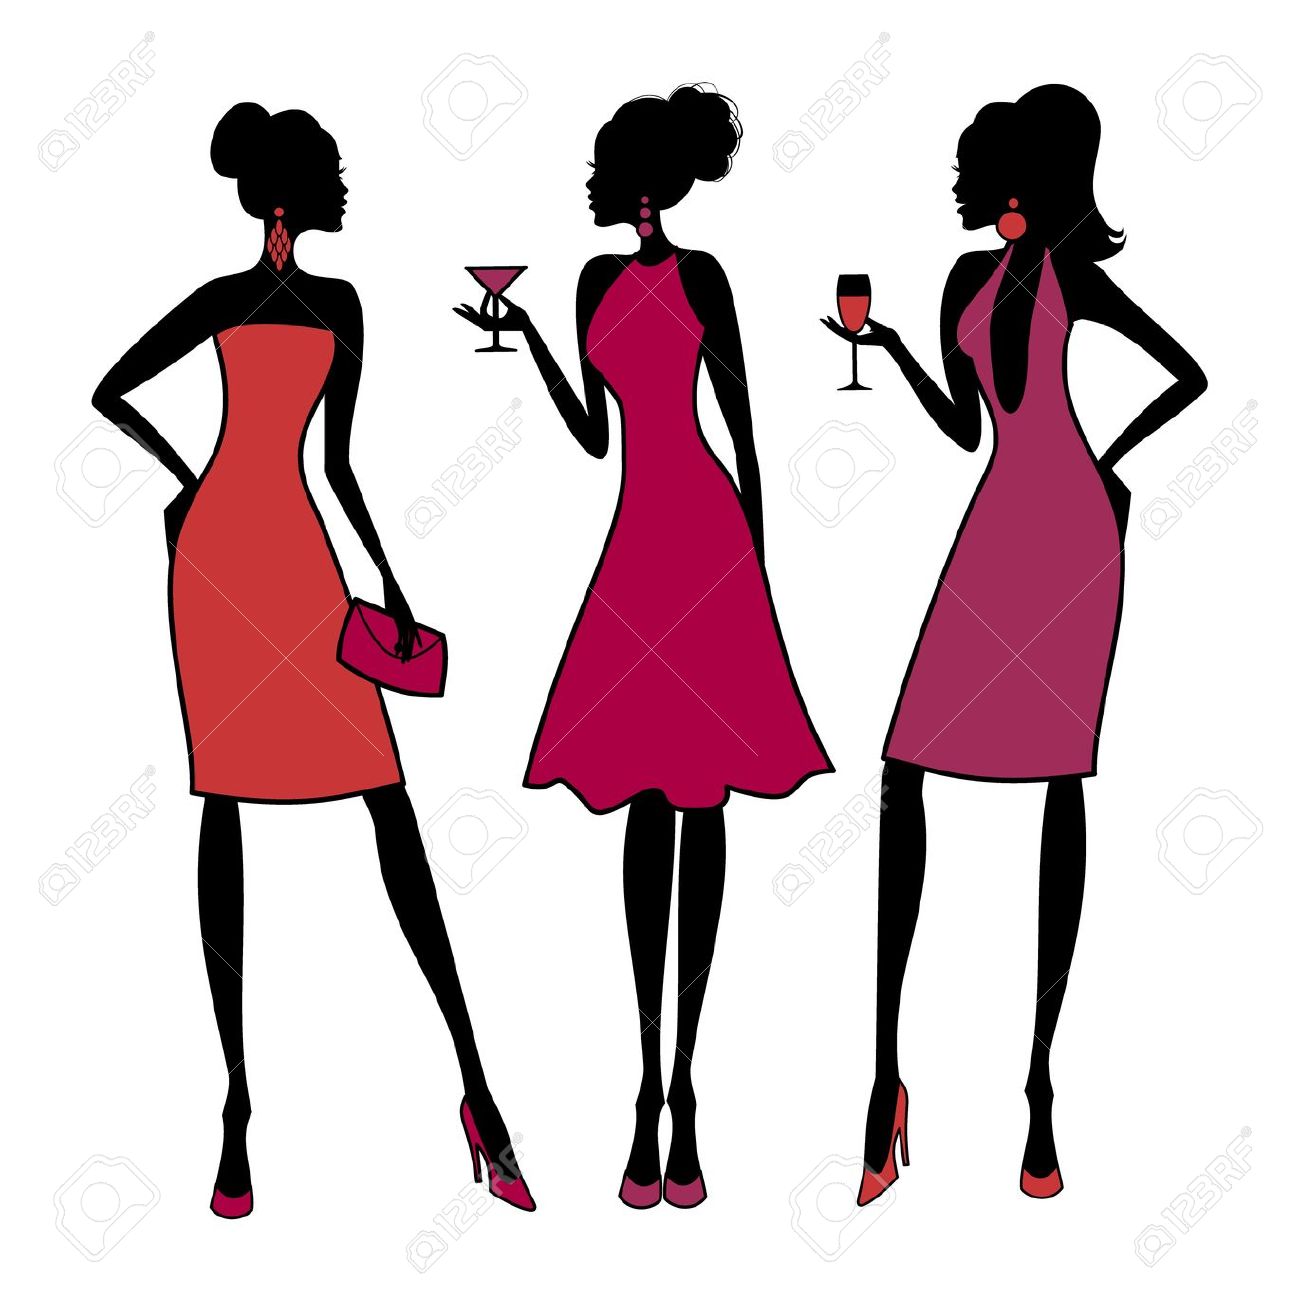 ... Girls Night Out Clipart .